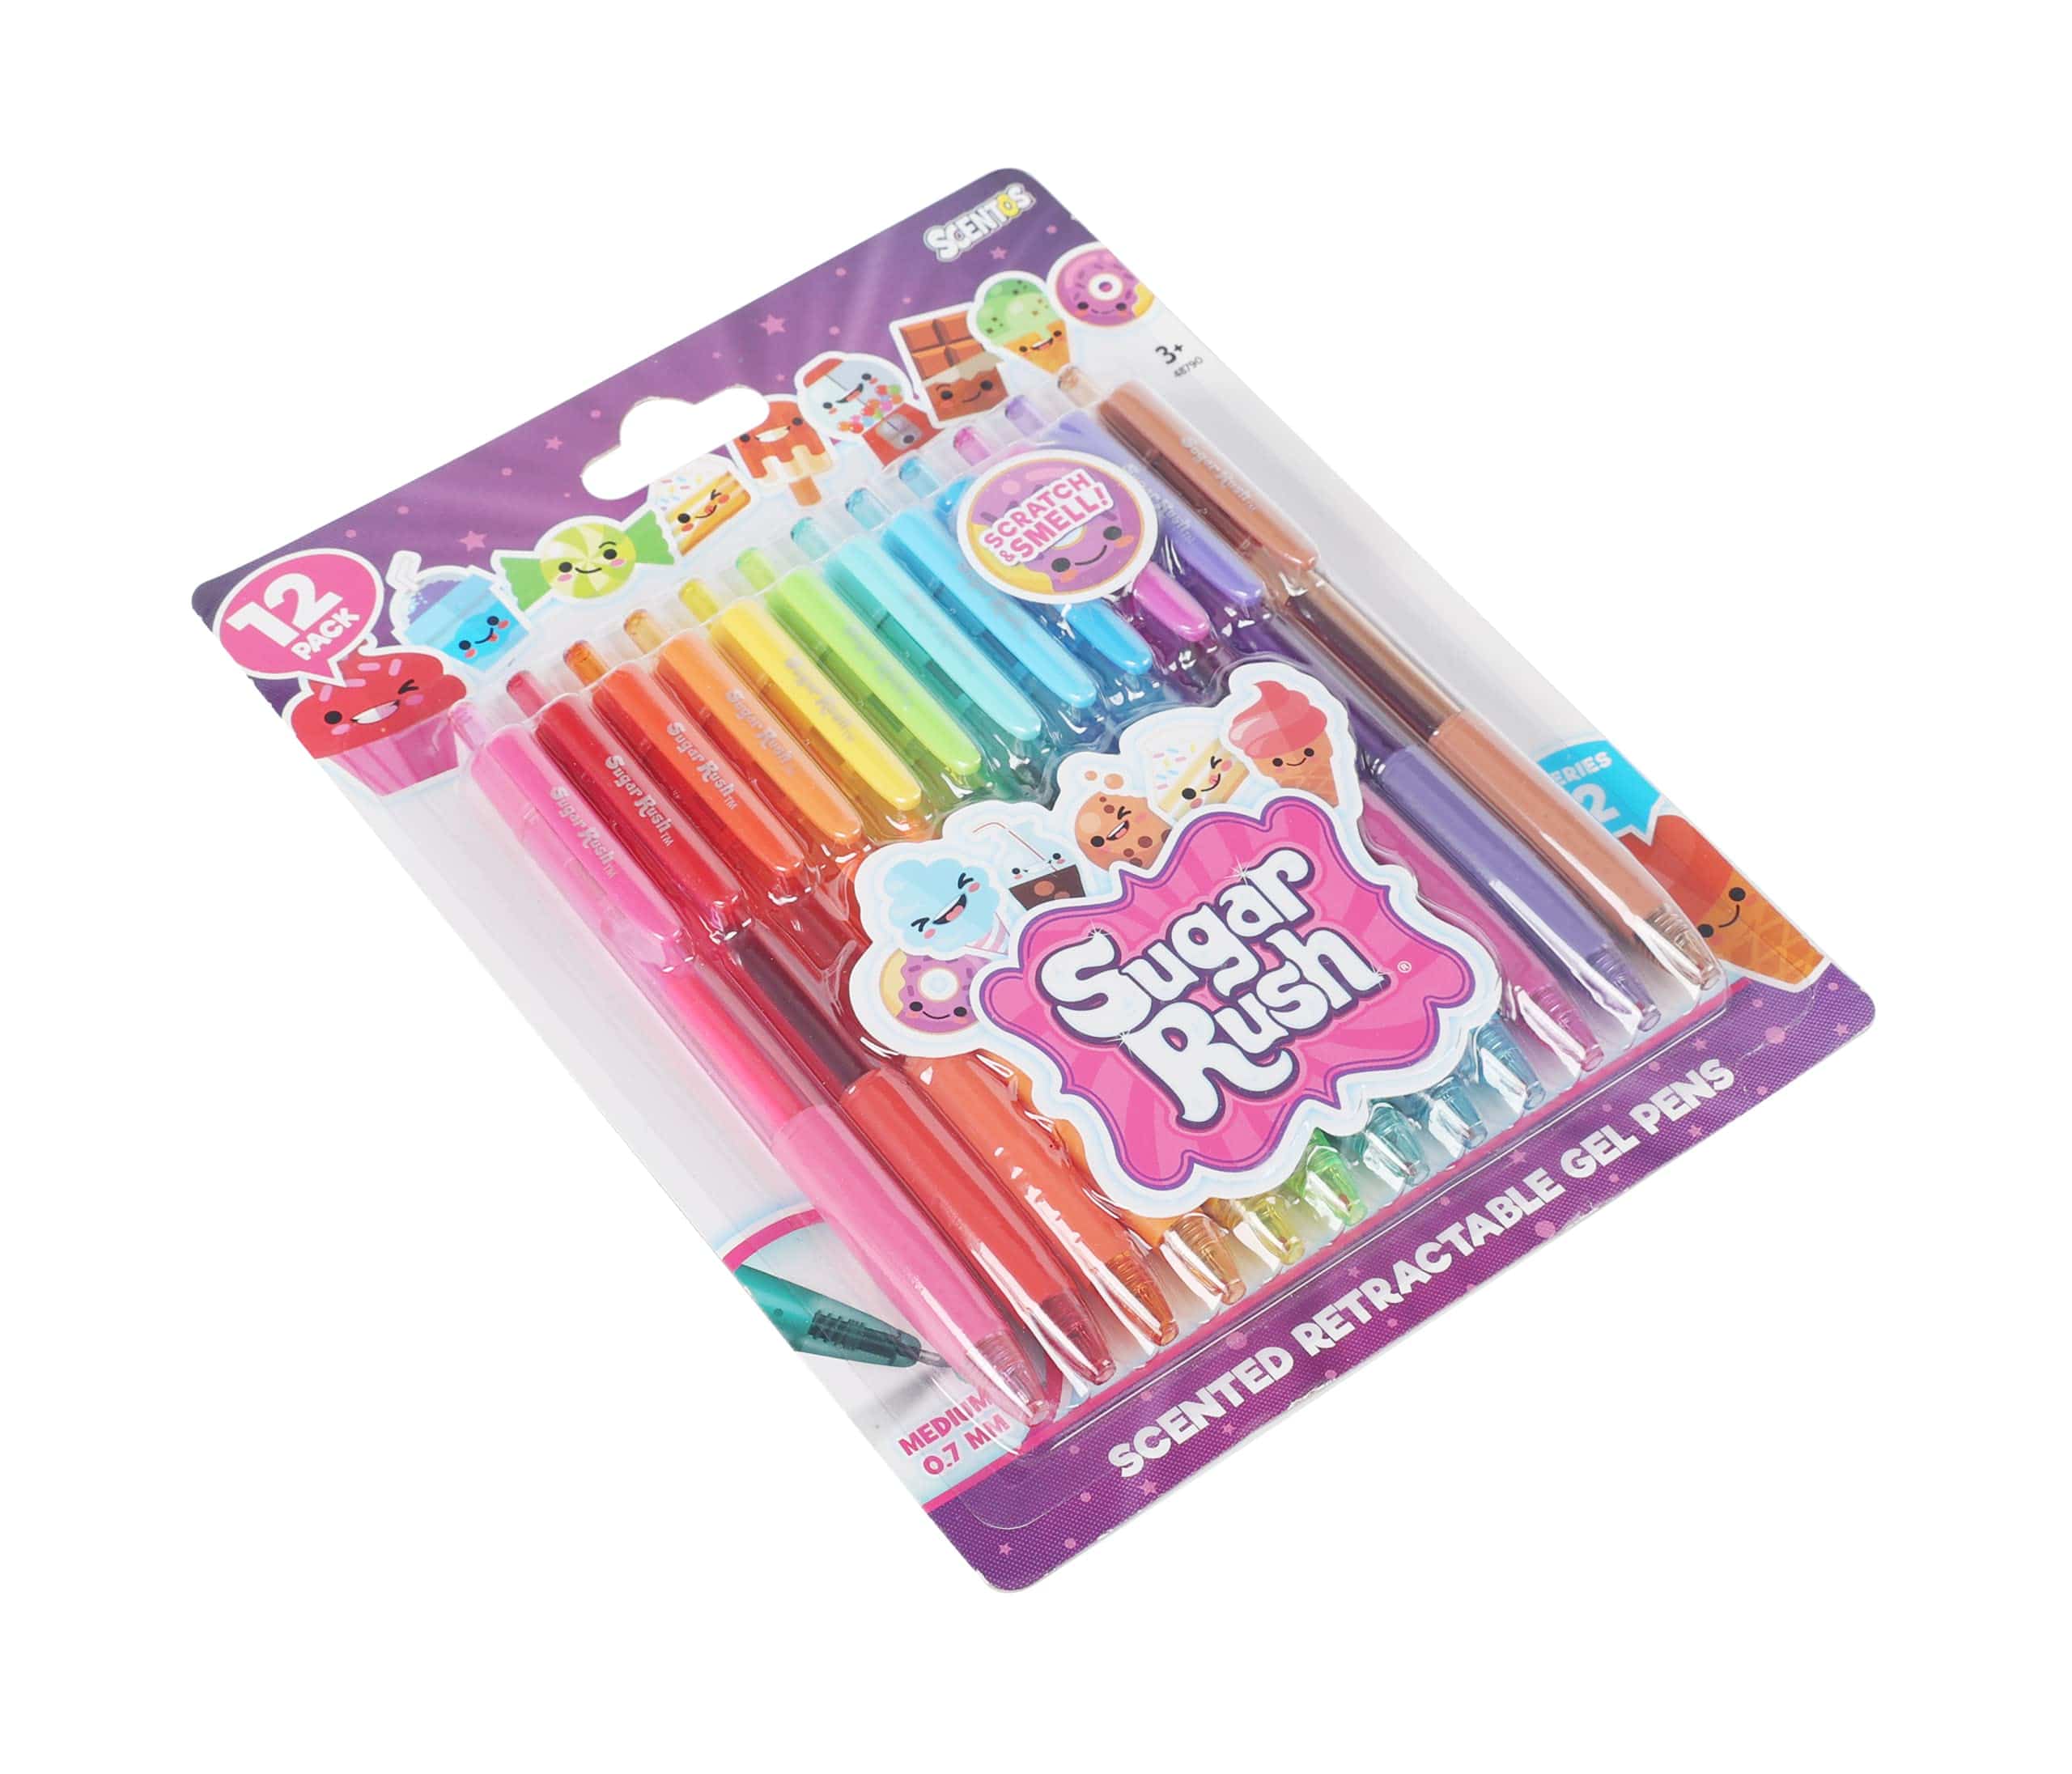 Scentos Sugar Rush Colored Gel Pens for Kids - Candy Scented Pens - Medium Point Gel Pens for Coloring - for Ages 4 and Up - 12 Count (Retractable)